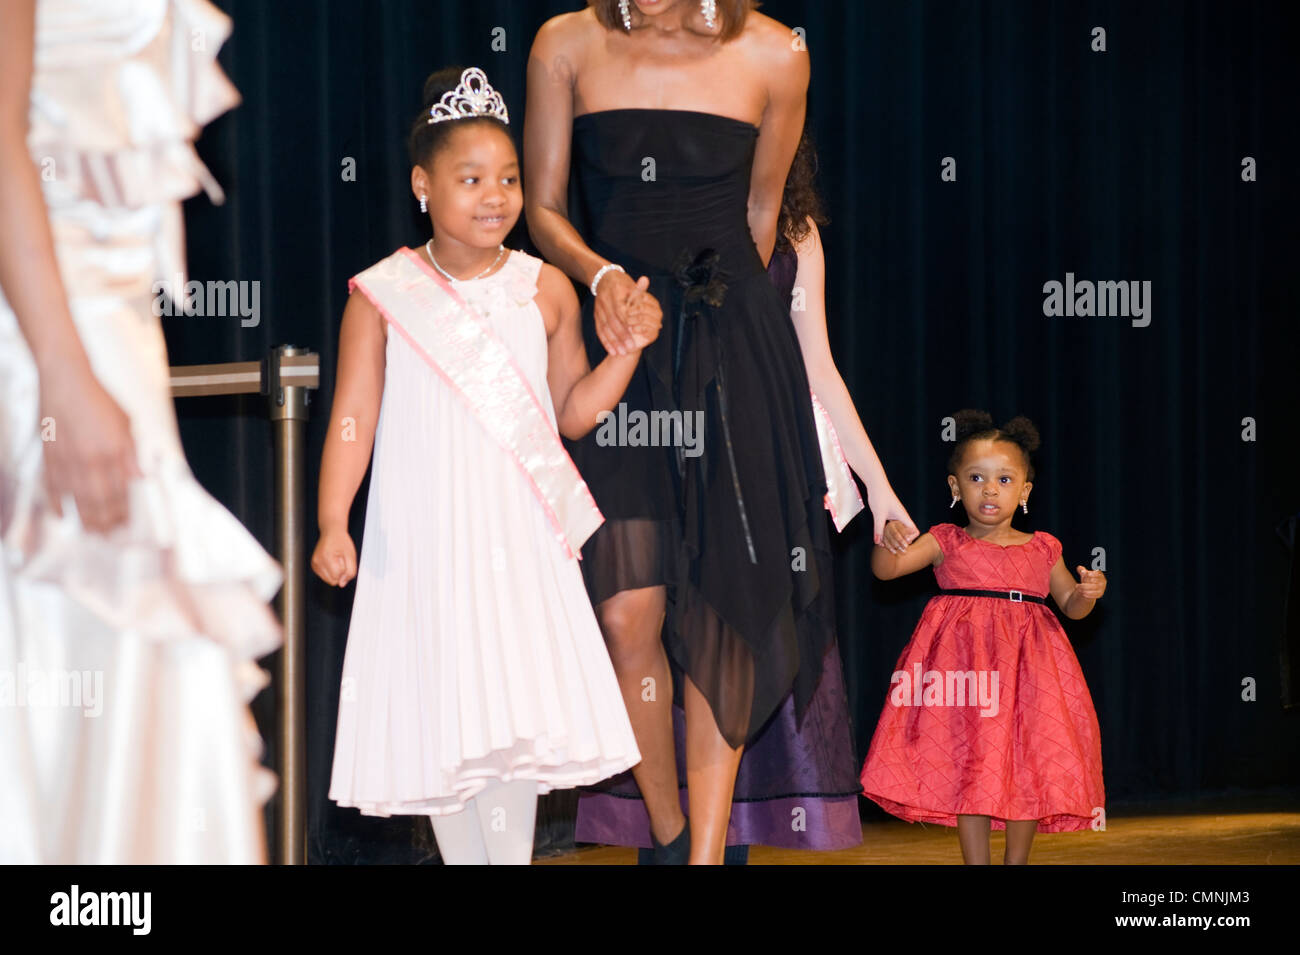 Image from the 2010 Ethnic New England Pageant held on April 3rd. Stock Photo